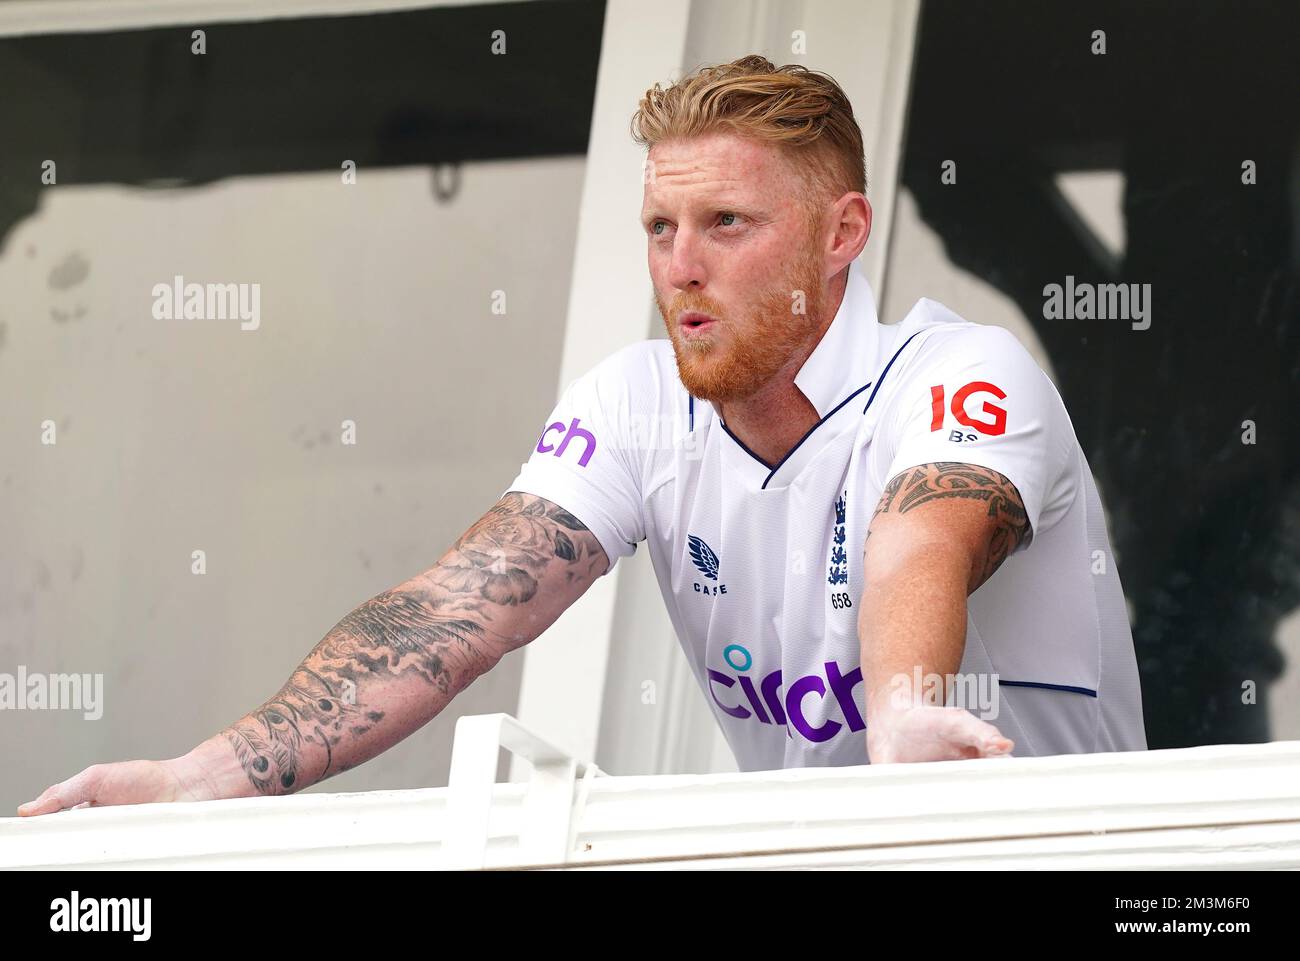 File photo dated 14-06-2022 of England's Ben Stokes looks on. Stokes as Root’s replacement he hardly had to stretch the limits of his imagination – the all-rounder was manifestly the only sensible option – but pairing him with Kiwi maverick McCullum was a masterstroke. So too was Key’s decision to split the coaching role into two specialist positions, with Matthew Mott a neat choice in the white-ball set-up. Issue date: Friday December 16, 2022. Stock Photo